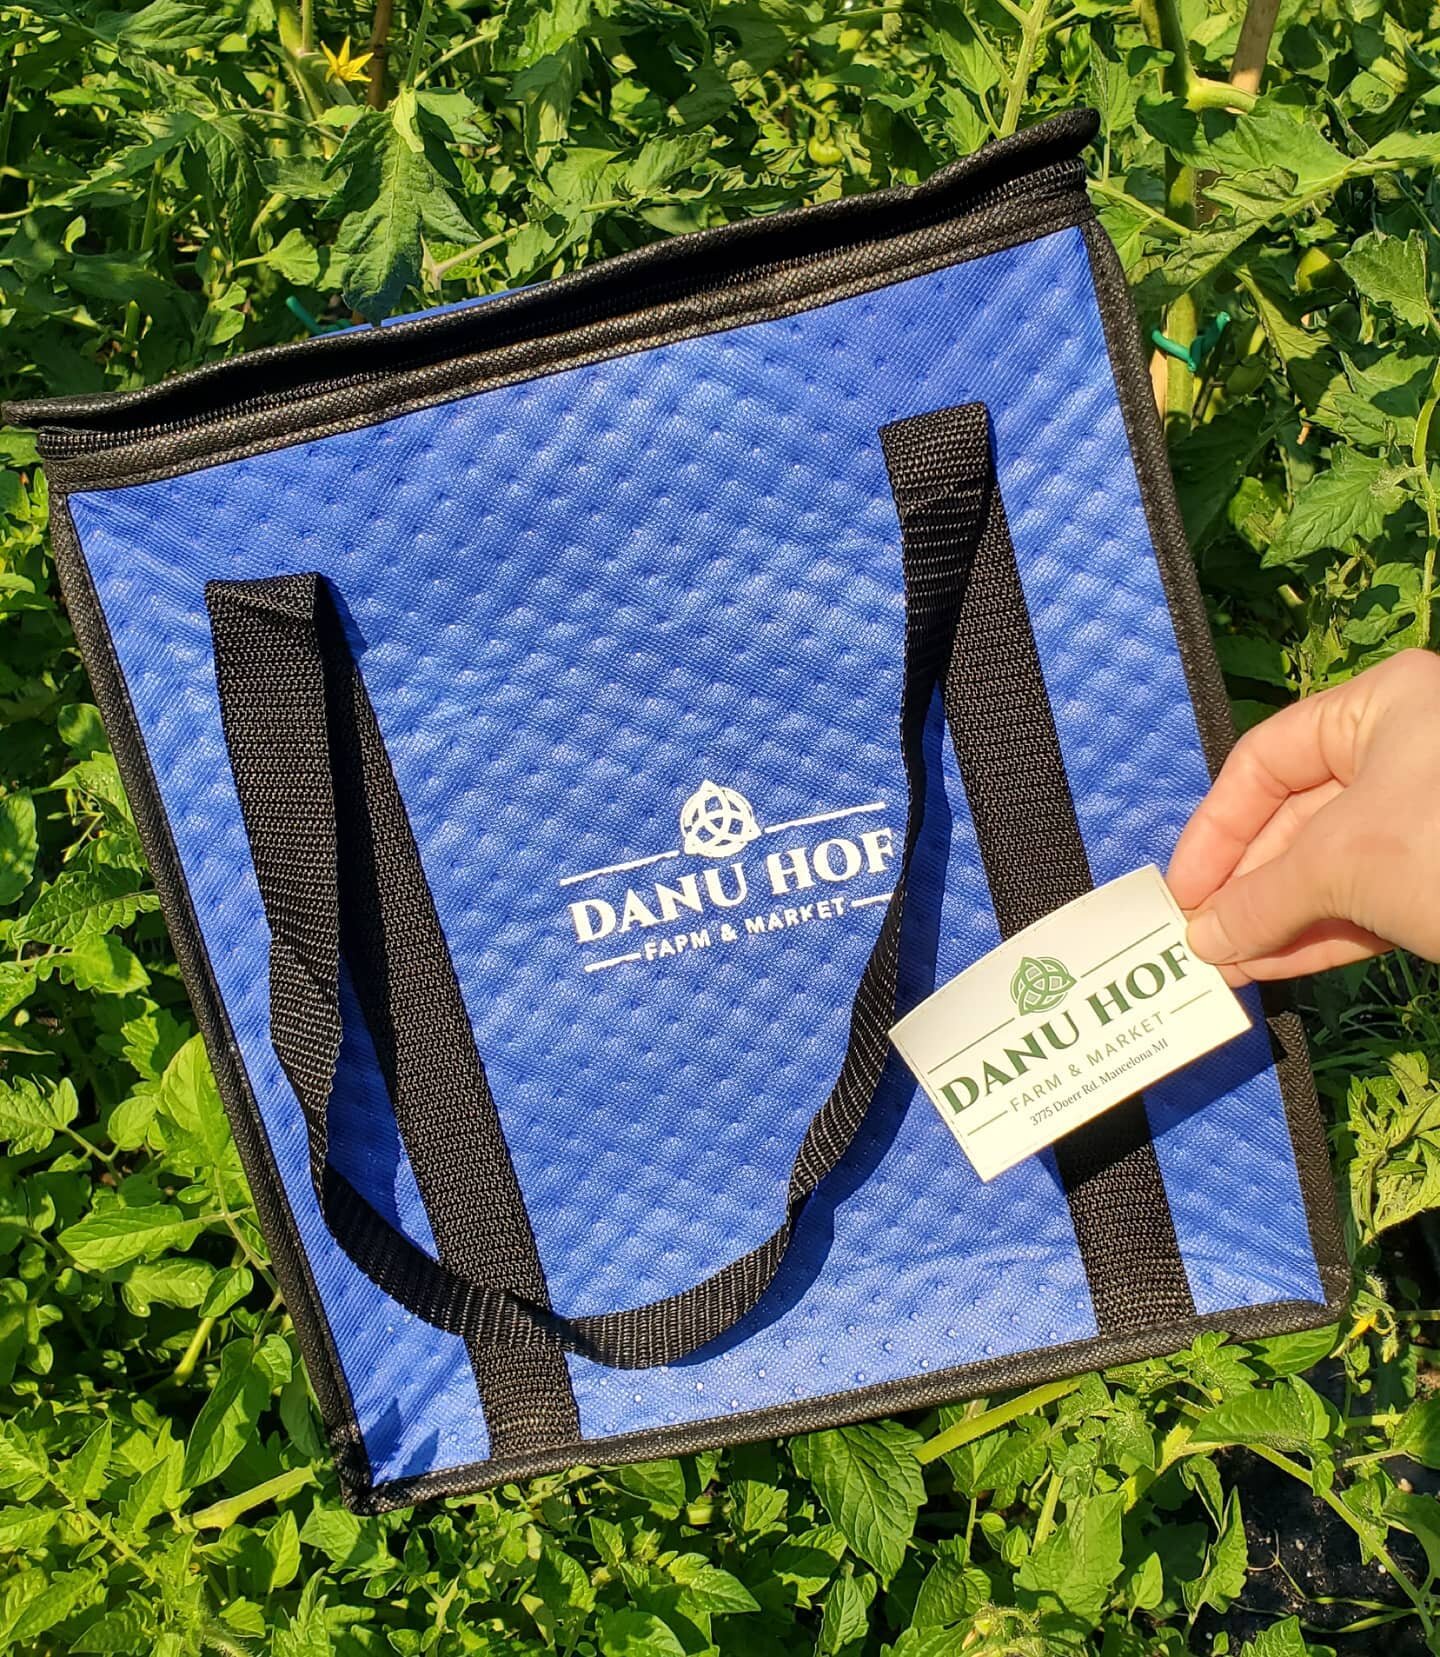 If you can spend $30 in 30 seconds at the grocery store like I can, consider investing it in a local farm this week instead!

@danuhof is offering memberships that come with great benefits and this awesome cooler bag and sticker!!!

We can all make a